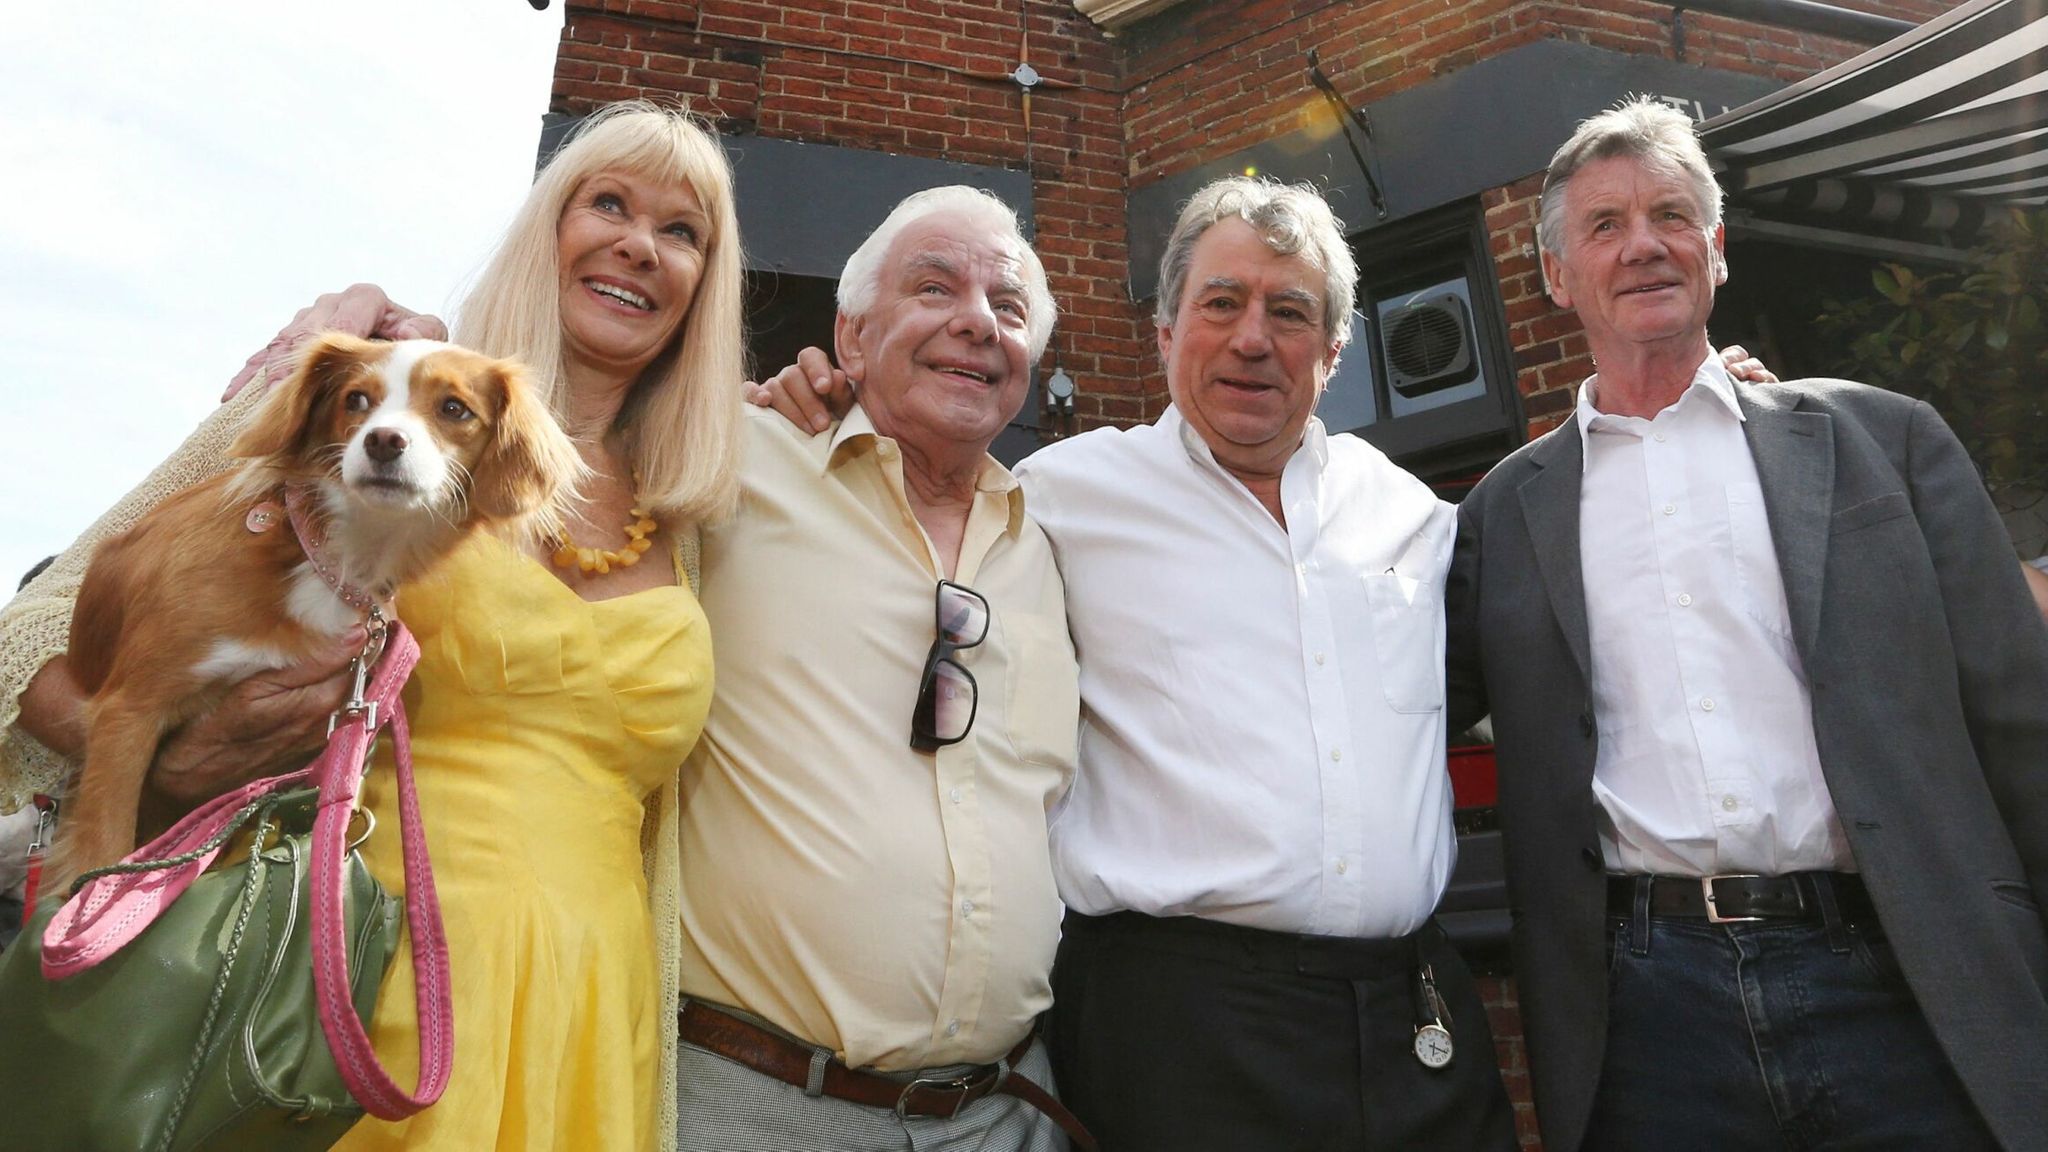 FILE PHOTO: Monty Python&#39;s Flying Circus actors (L-R) Carol Cleveland, former colleague Barry Cryer, actor Terry Jones and Michael Palin pose outside the Angel pub in Highgate, north London September 6, 2012. A blue plaque organised by friends and family was unveiled to former Monty Python star Graham Chapman following news that English Heritage had dropped plans for an &#39;official&#39; Blue Plaque to the star, due to budget cuts. Chapman drank, wrote and was barred from the Angel pub in the 1970s. RE